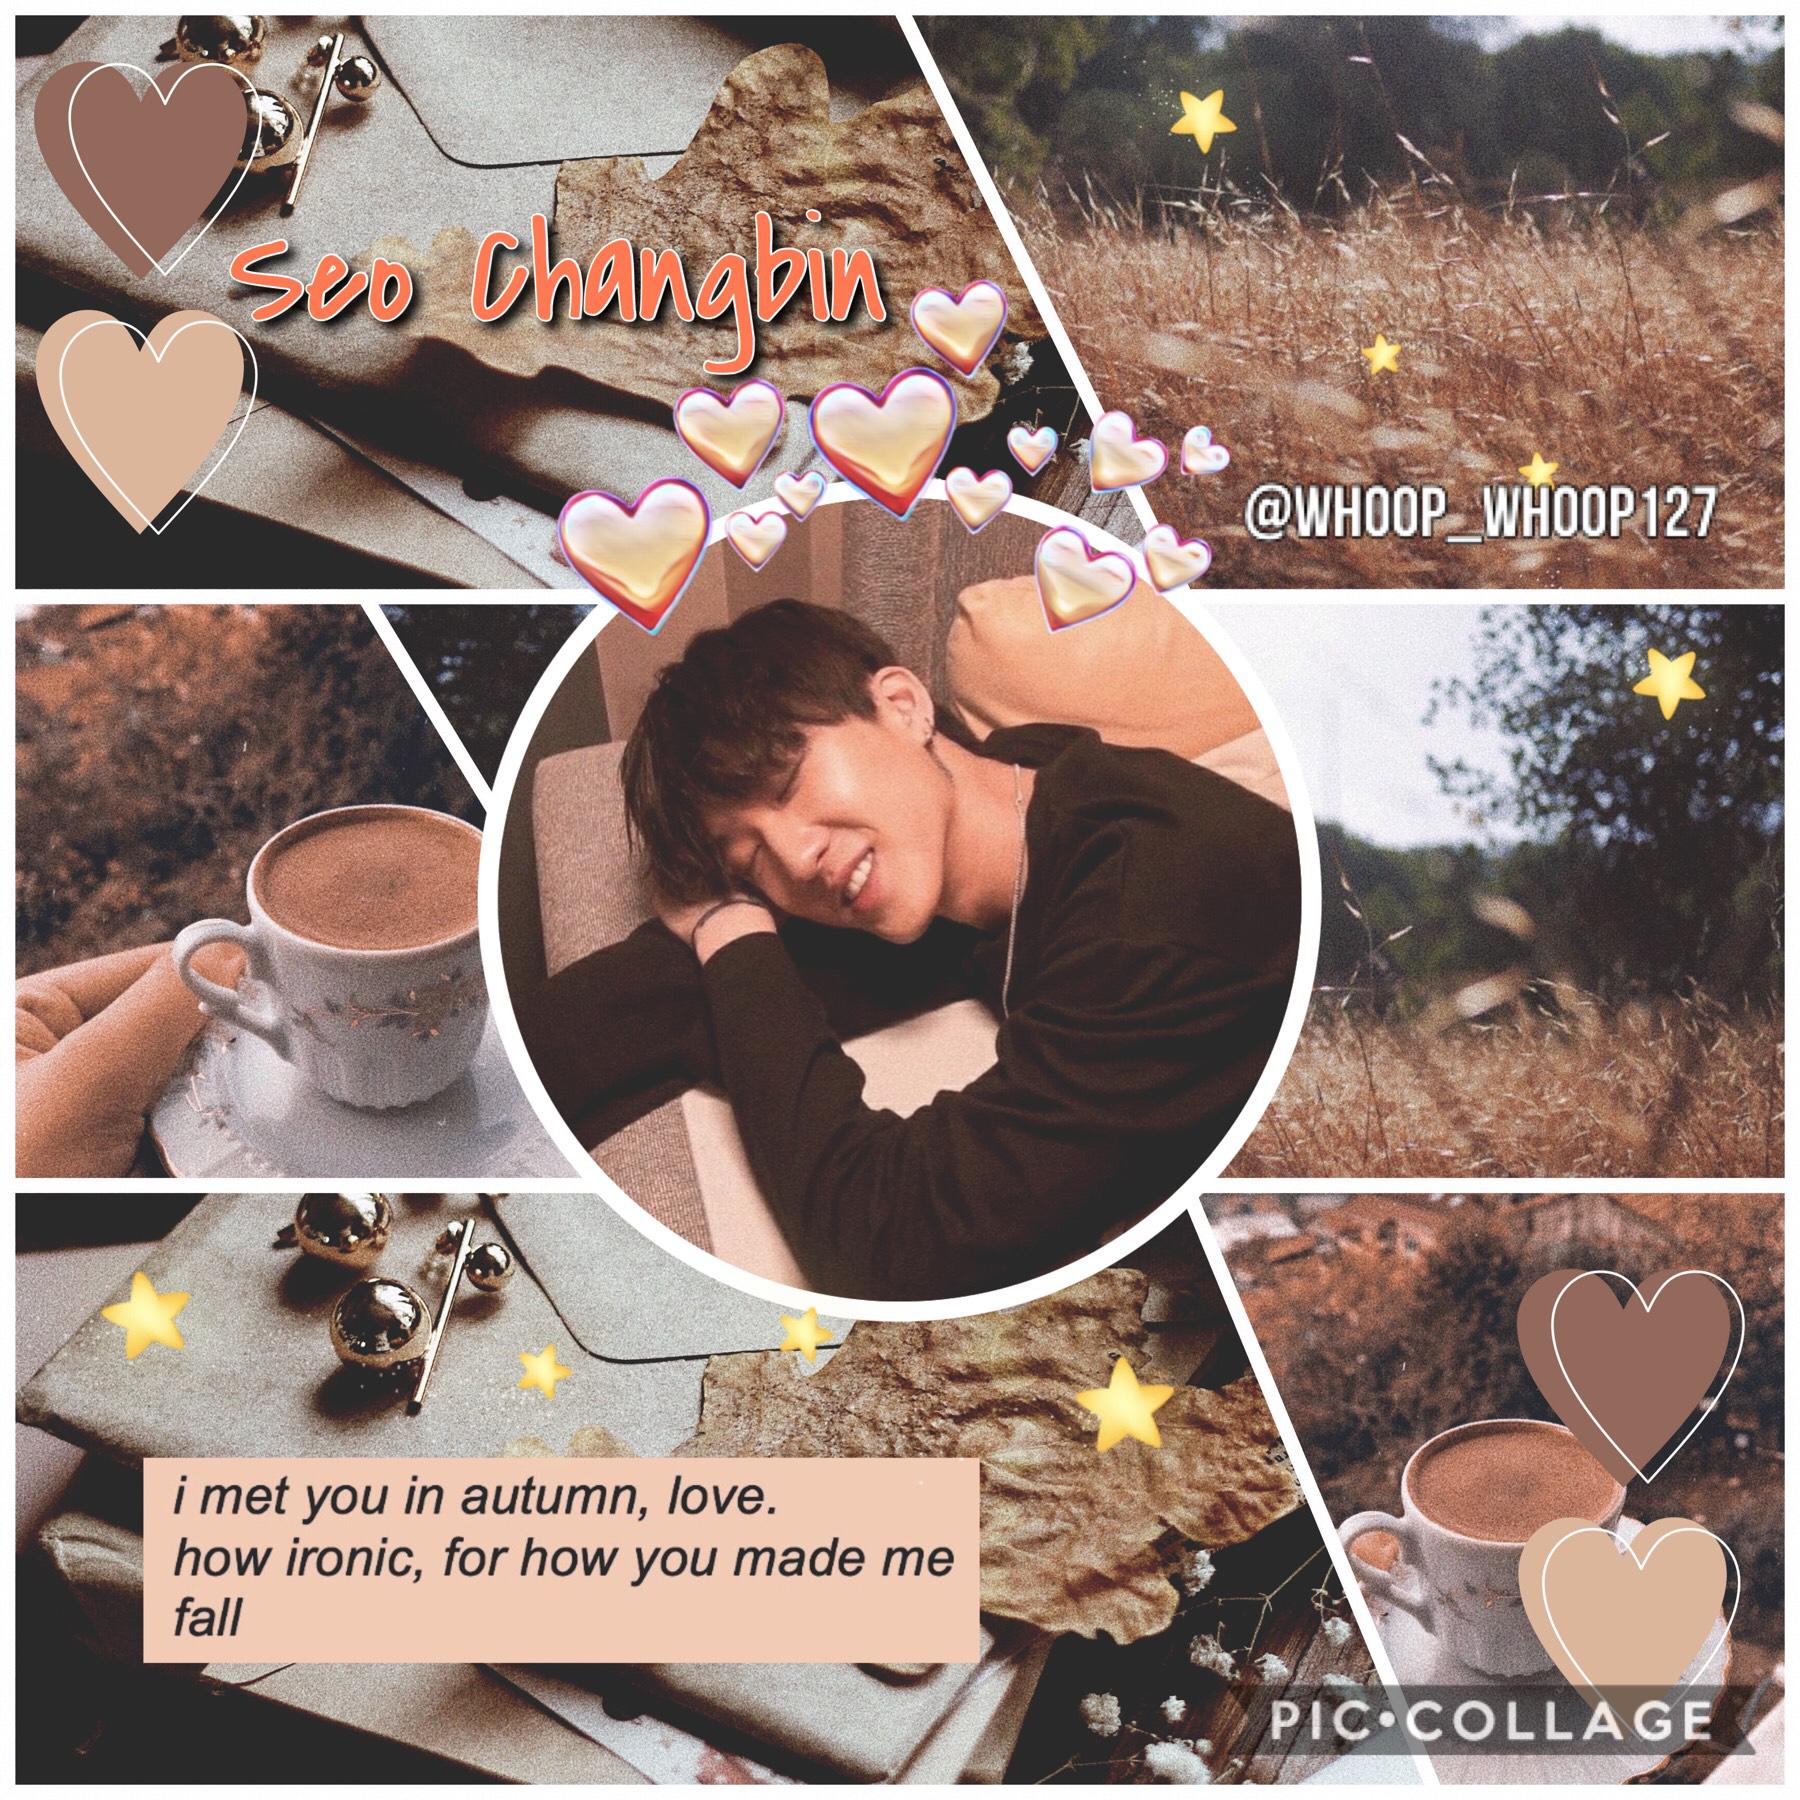 •🚒•
🍂Changbin~Stray Kids🍂
Really vibing with the autumn aesthetics🤙
I’m sure you all heard the news about Hwall leaving The Boyz and Woojin leaving SKZ... I’m still extremely shocked and sad but we got to support them no matter what❤️ SKZ 9 or none :’) *D